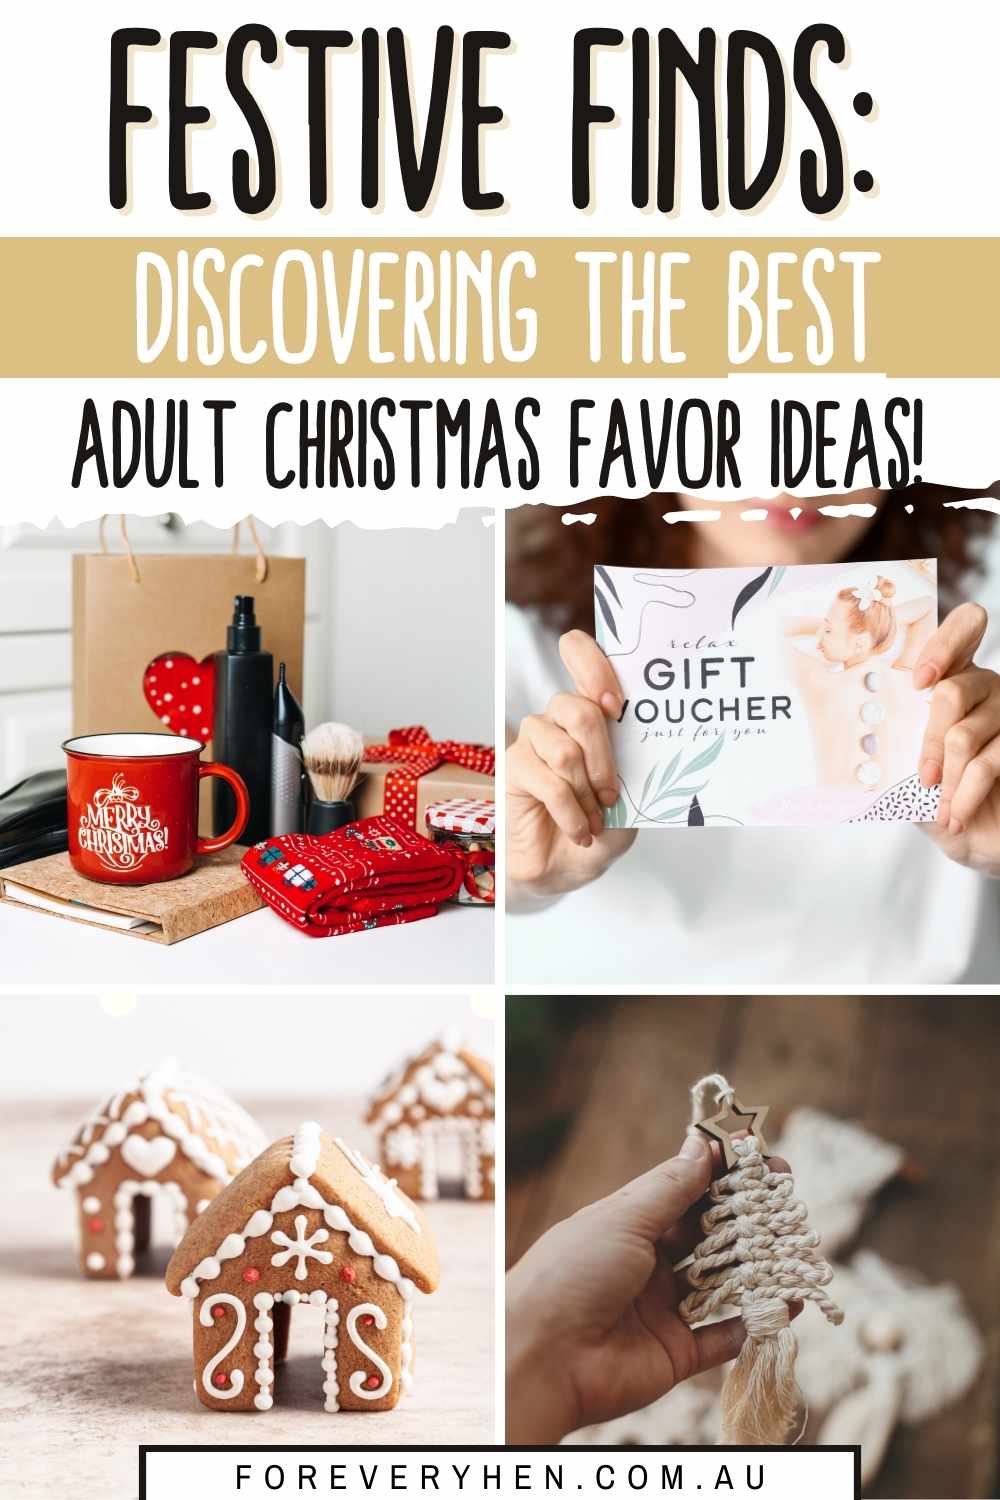 Collage of Christmas gift ideas such as gift voucher, care package and macrame. Text overlay: Festive finds - discovering the best adult Christmas party favor ideas!